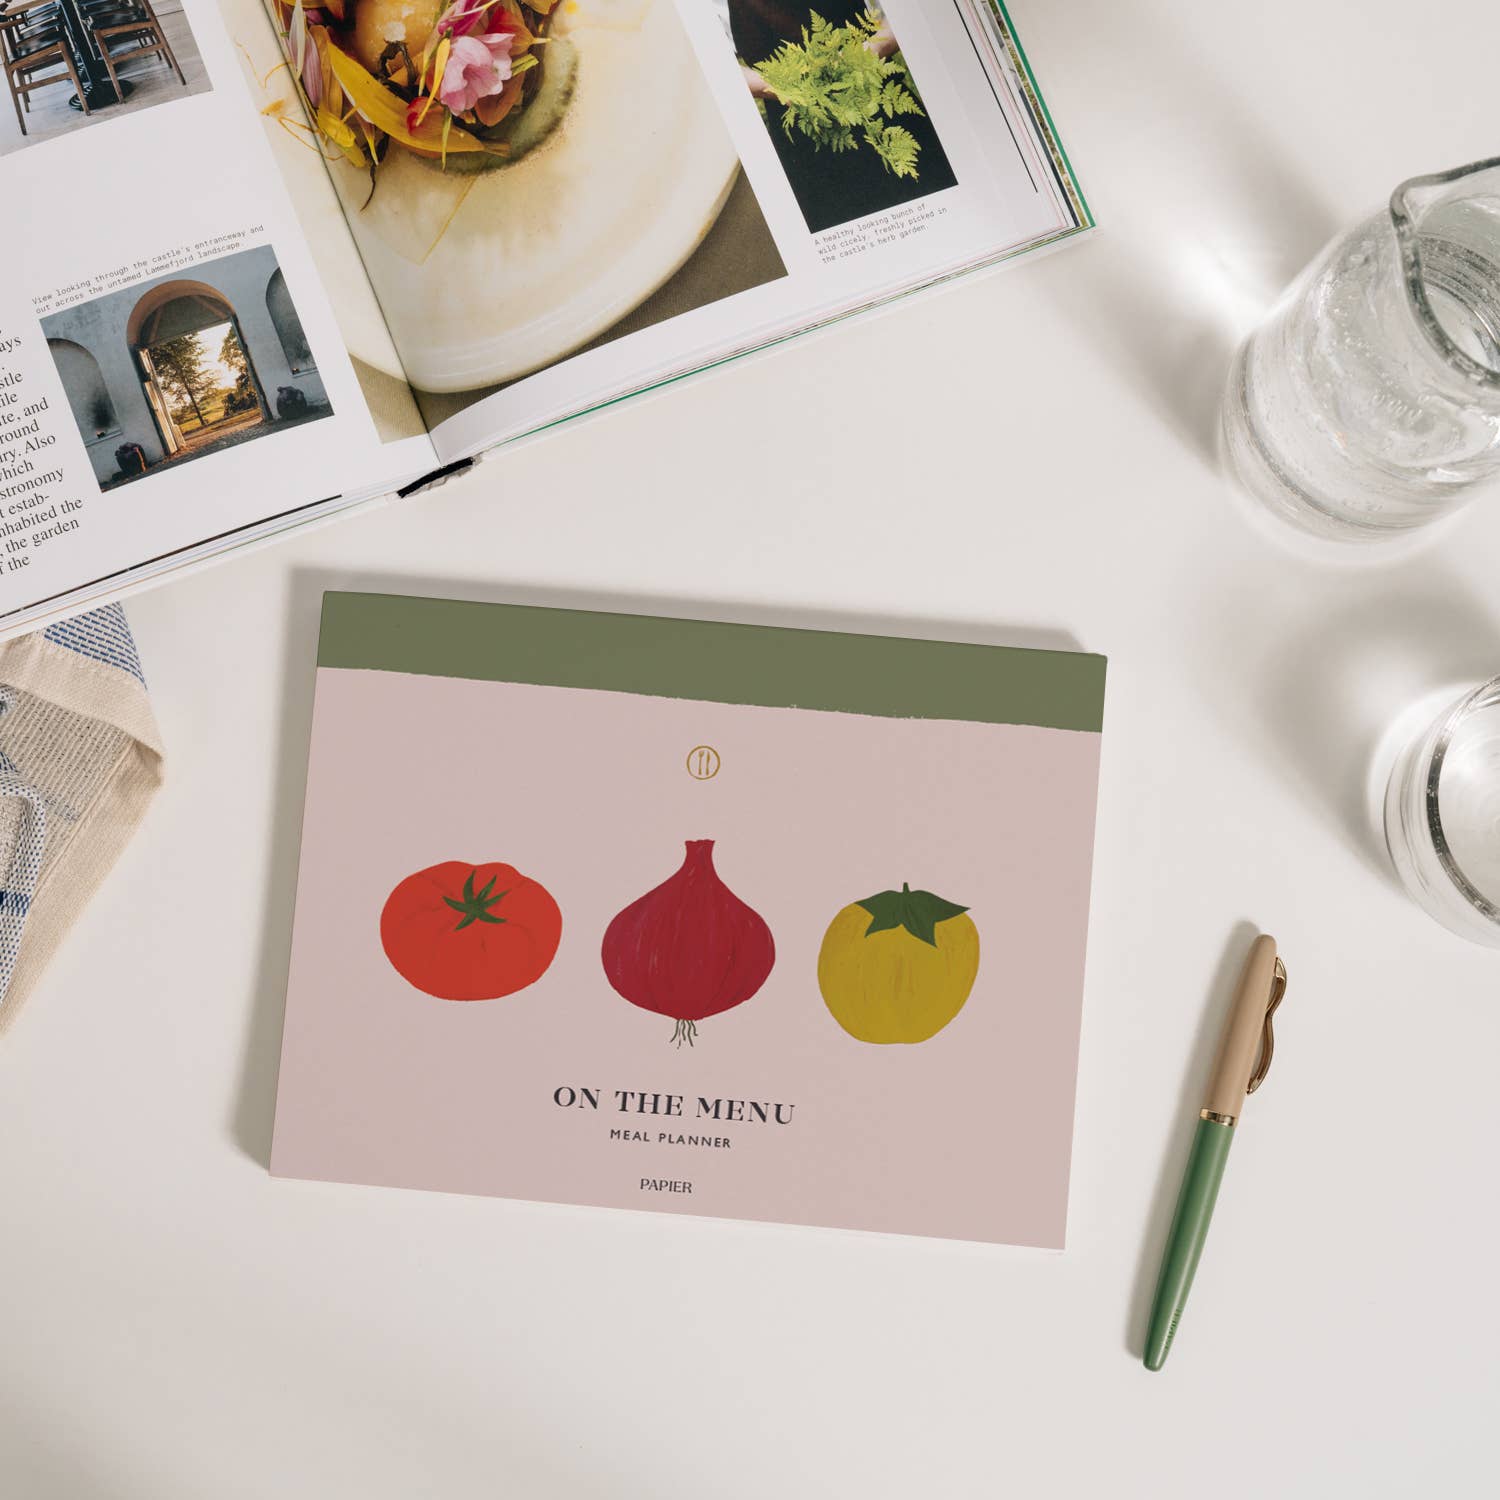 Front cover of Vegetable Medley Meal Planner. Features illustration of tomato, red onion and yellow apple on neutral background with rustic green stripe along the spine. Cover text reads "ON THE MENU... meal planner. " Shown on white table with magazine and pen.